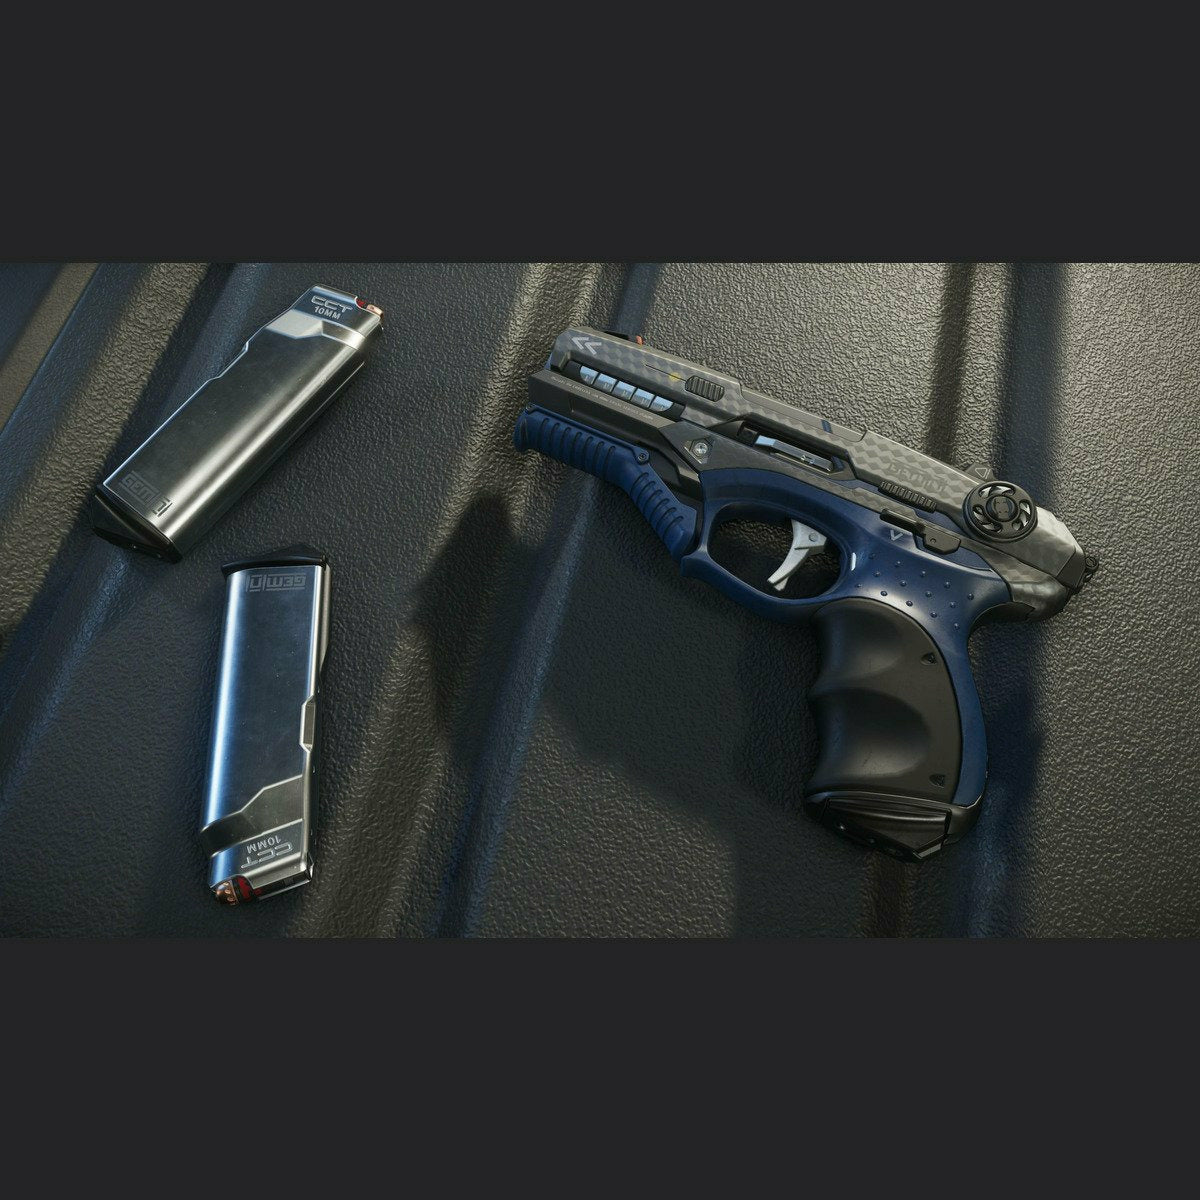 Gemini LH86 Pistol - Voyager edition | Space Foundry Marketplace.